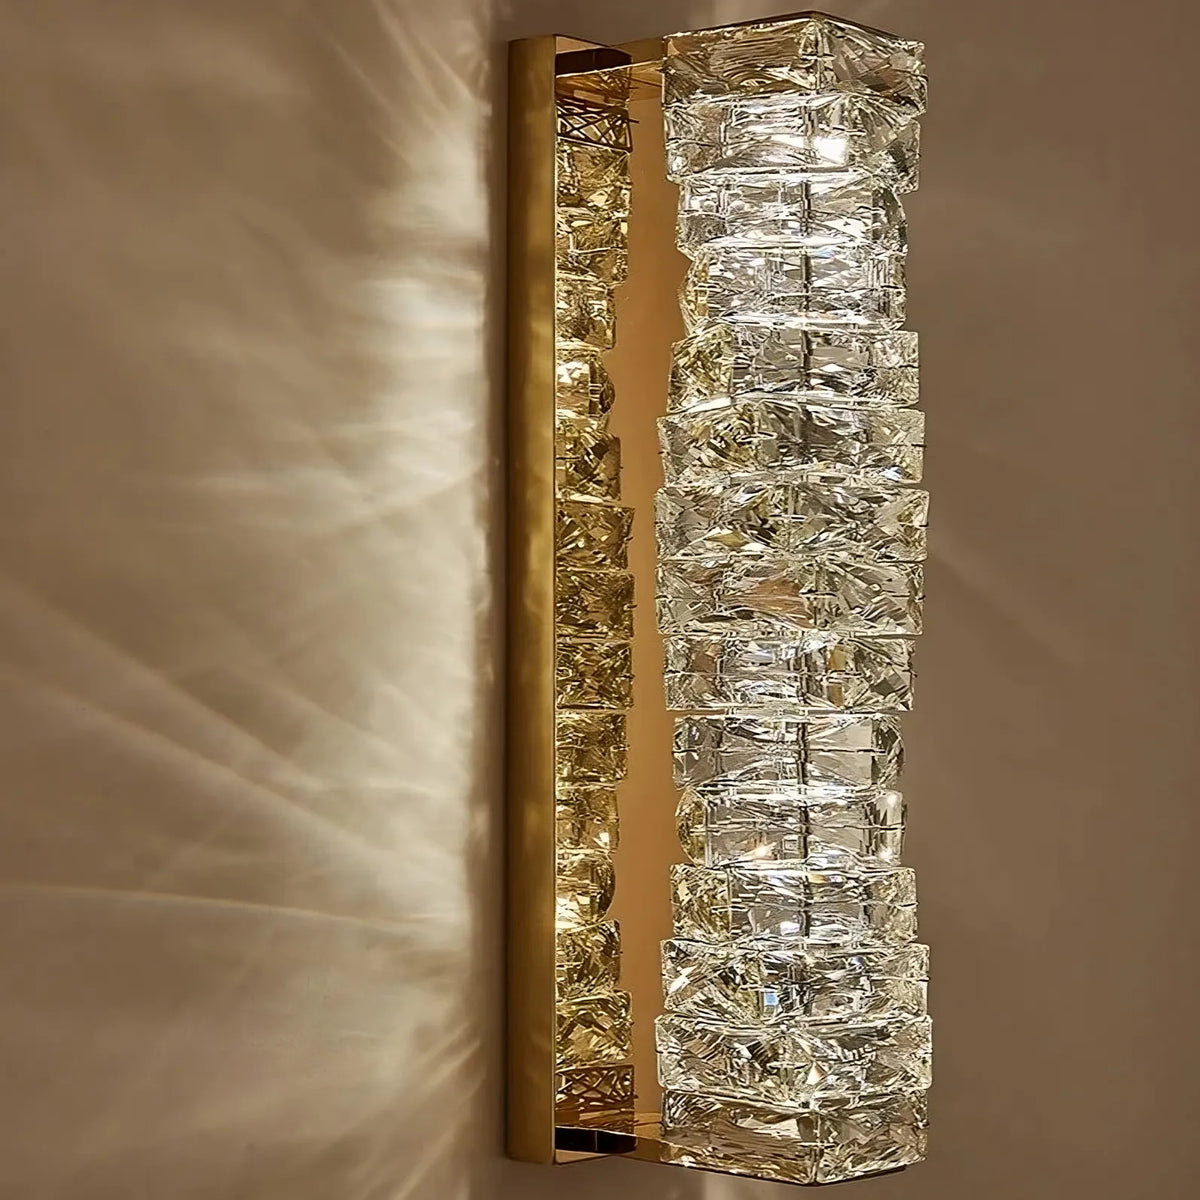 A modern Morsale.com Bacci wall sconce featuring a vertical row of square handmade crystals that emit a warm, soft glow, casting geometric shadows on the wall.